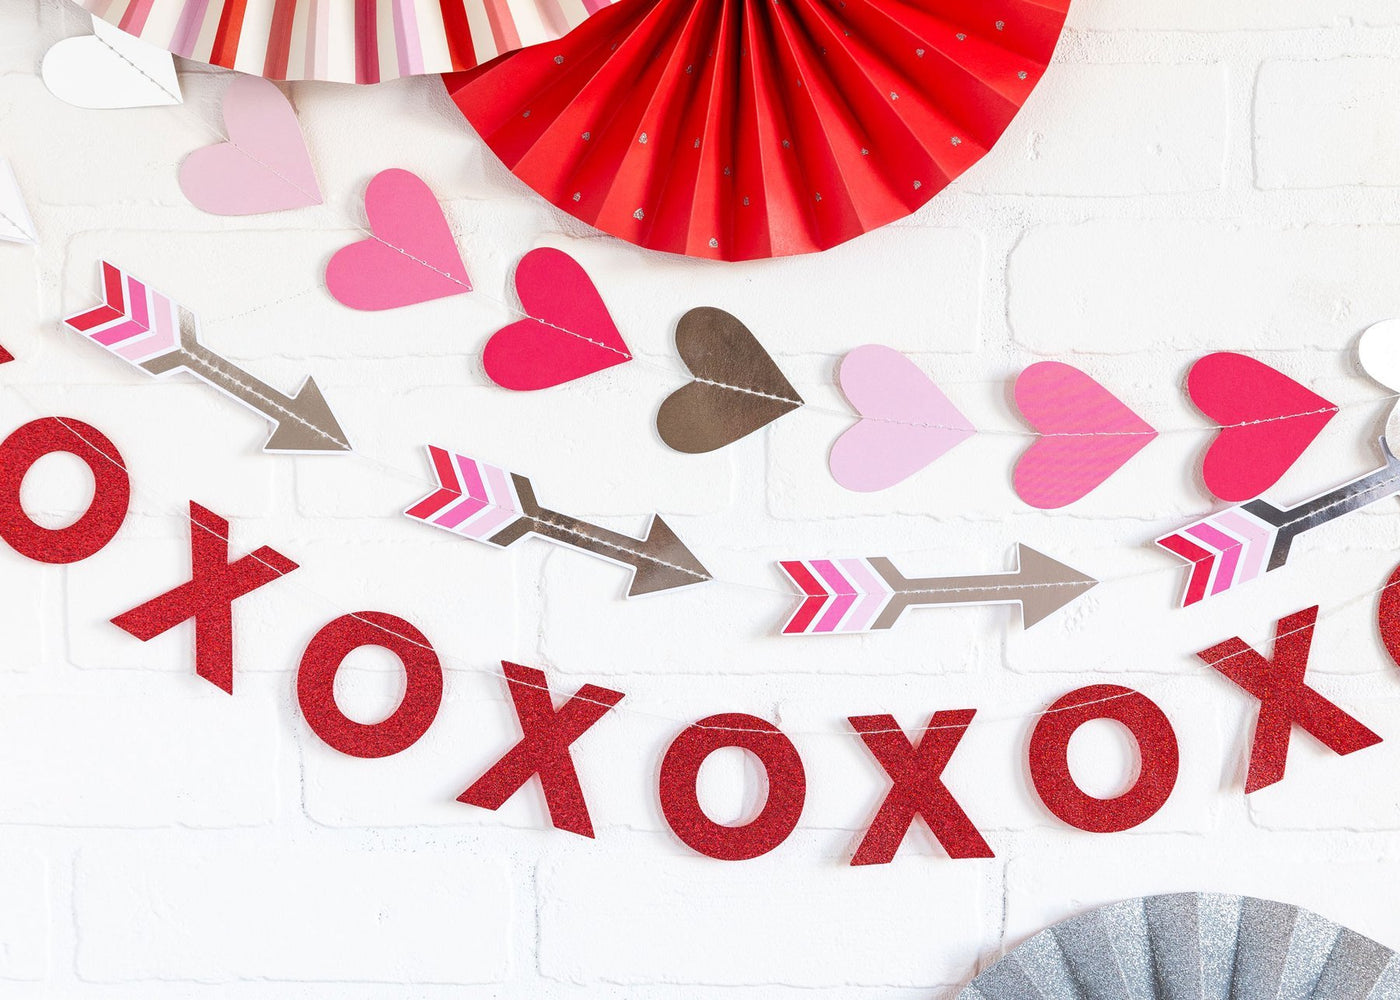 Each valentines day wall banner set hung and displayed in front of a white wall with other valentine's day decor